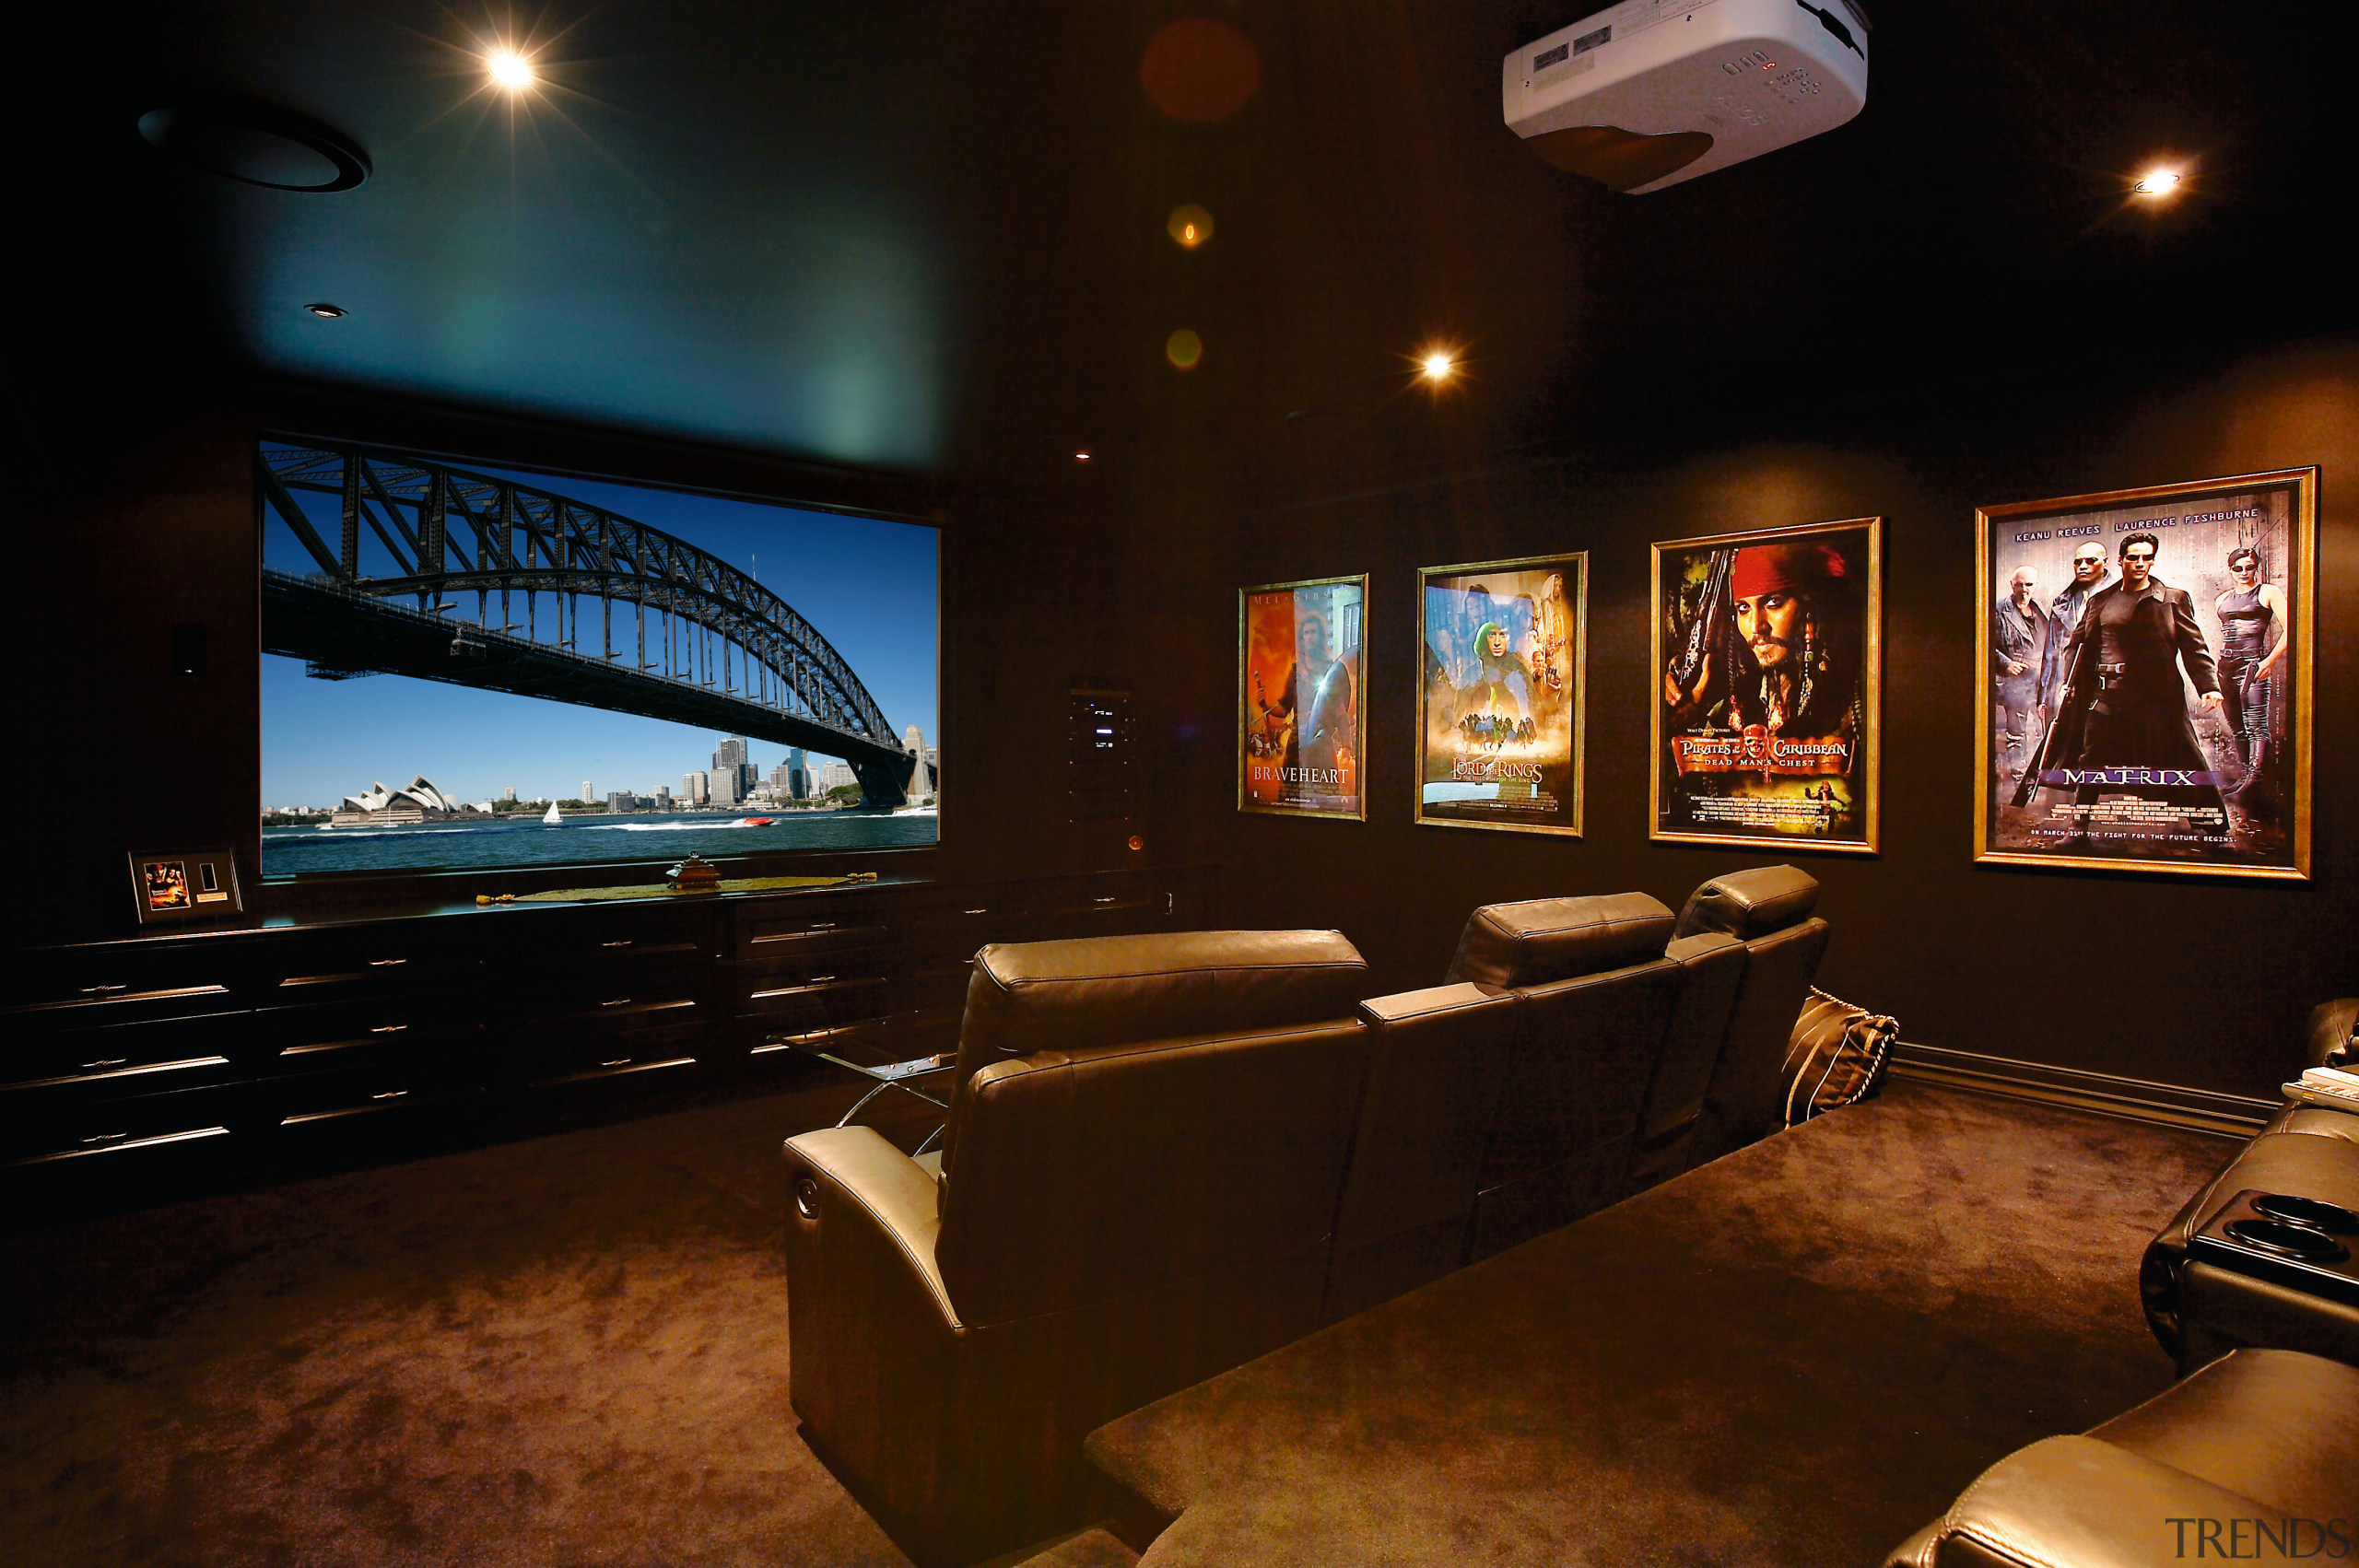 This dedicated home cinema shows the level of interior design, brown, black